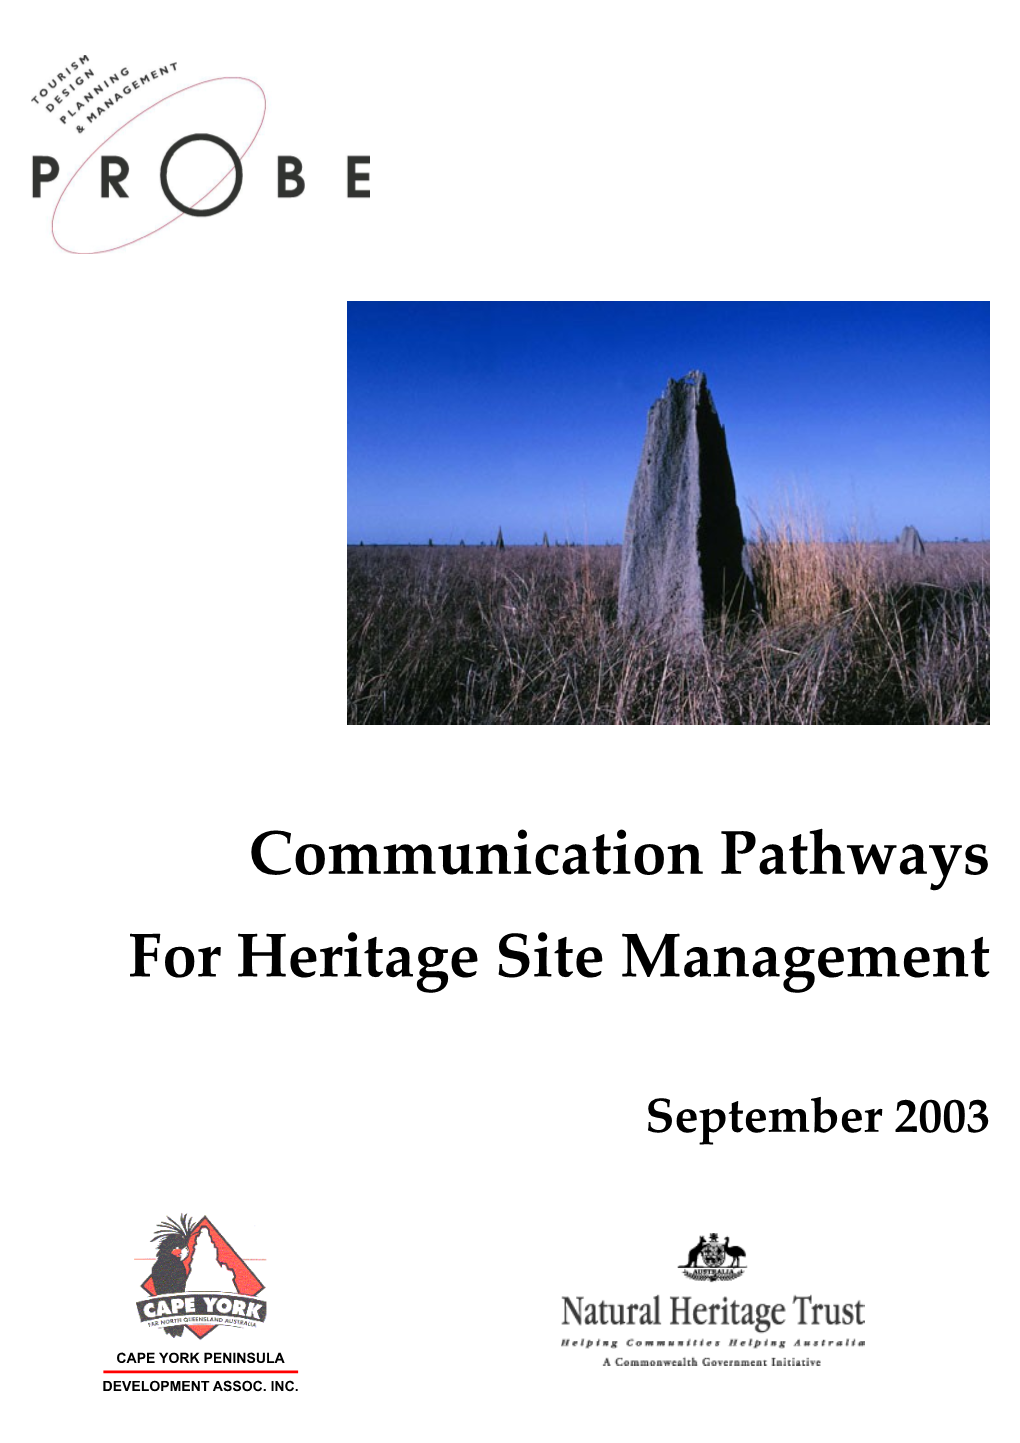 For Heritage Site Management